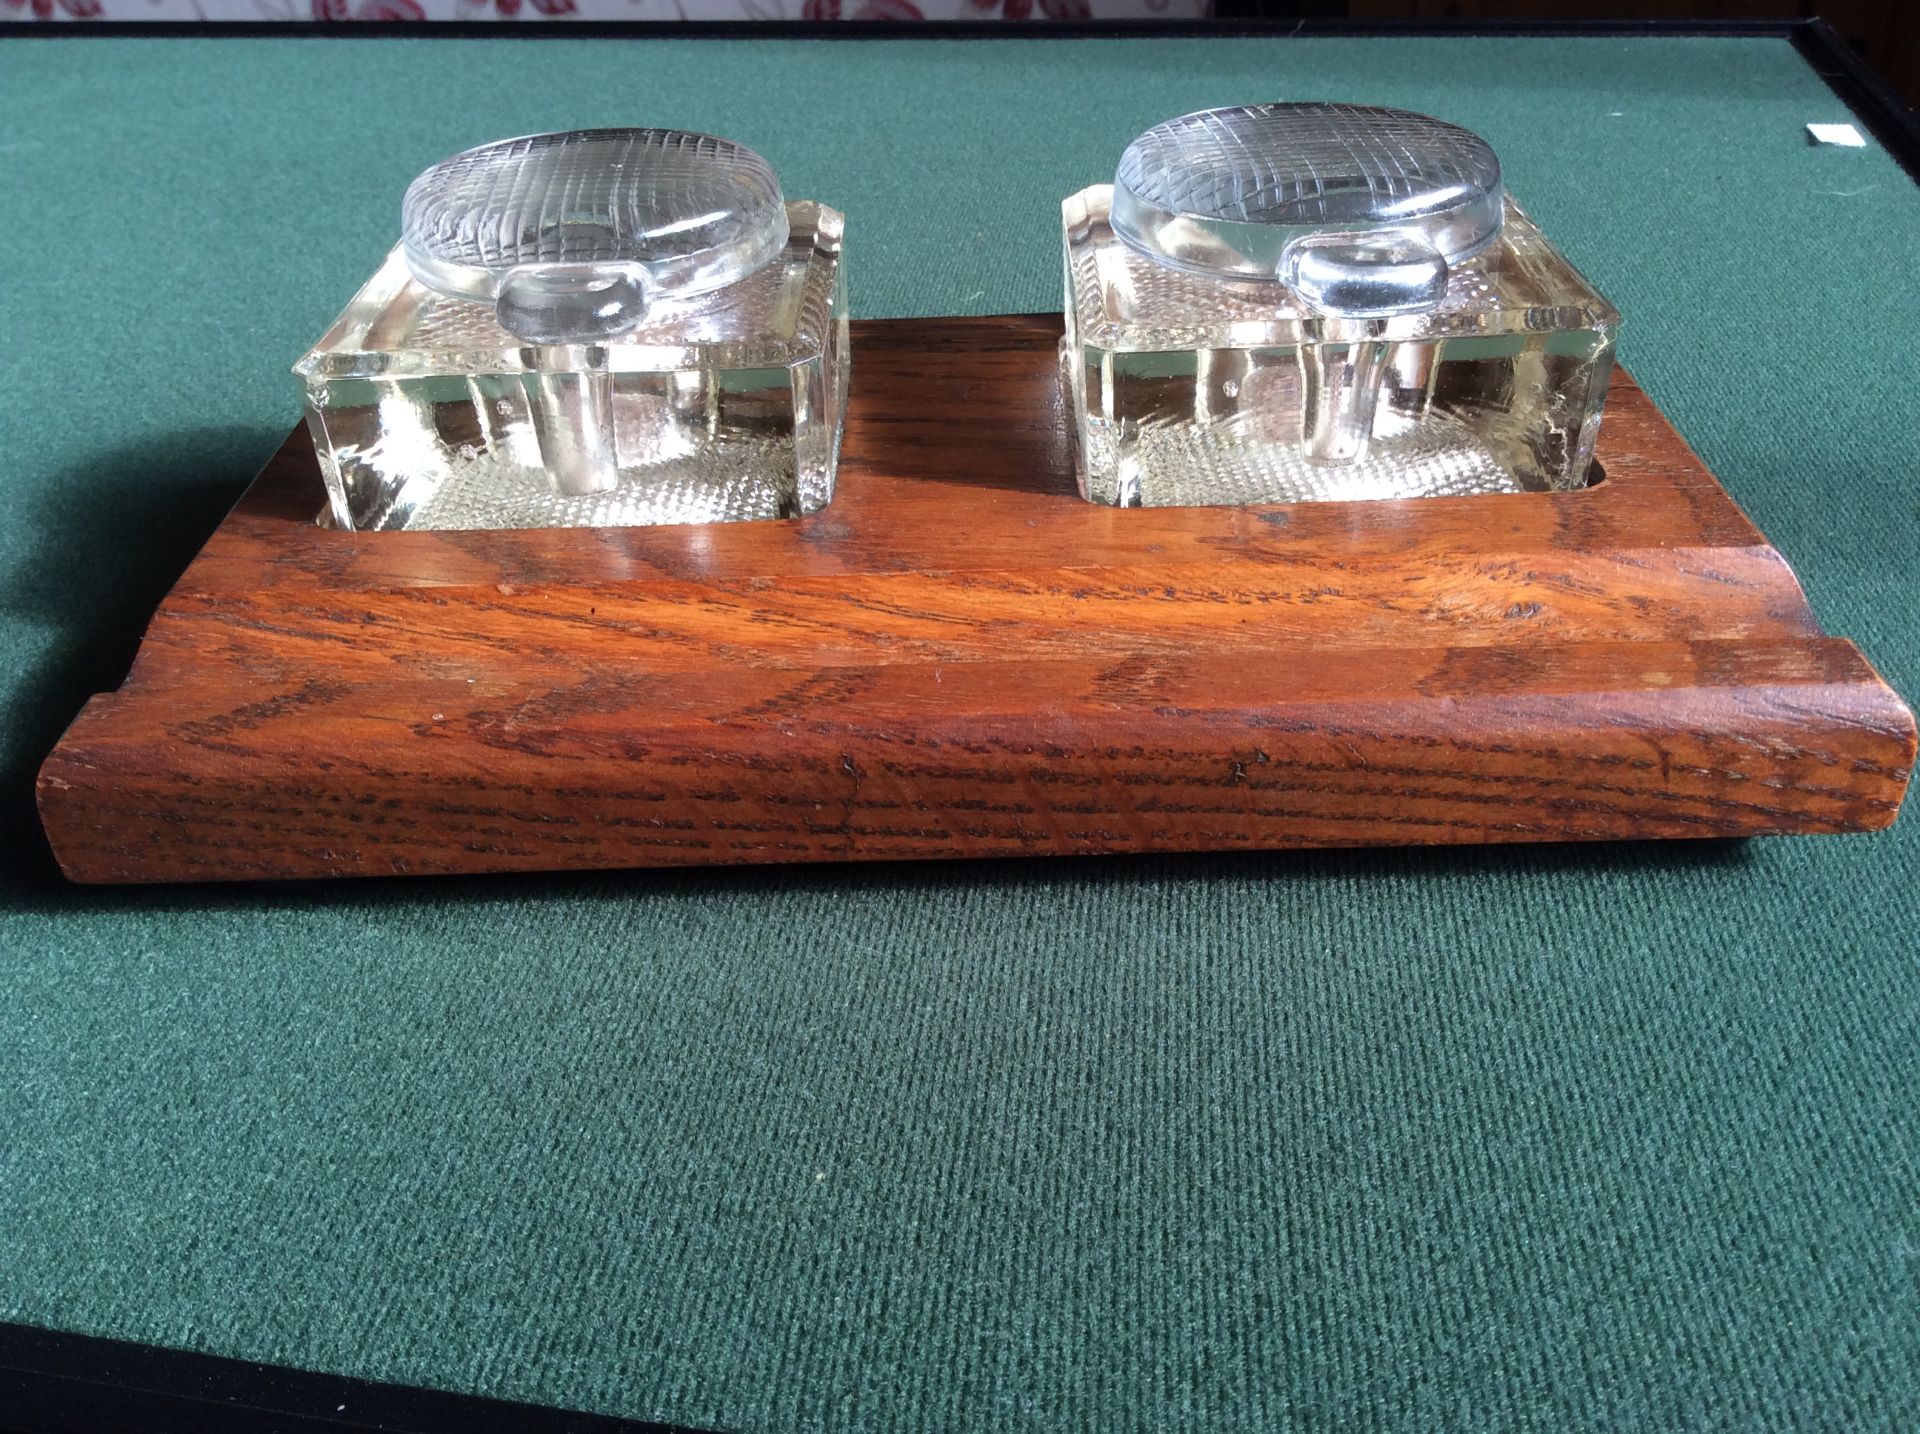 Double Ink Well 2 Glass Ink Pots in Oak Wooden Desk Stand - Image 7 of 7